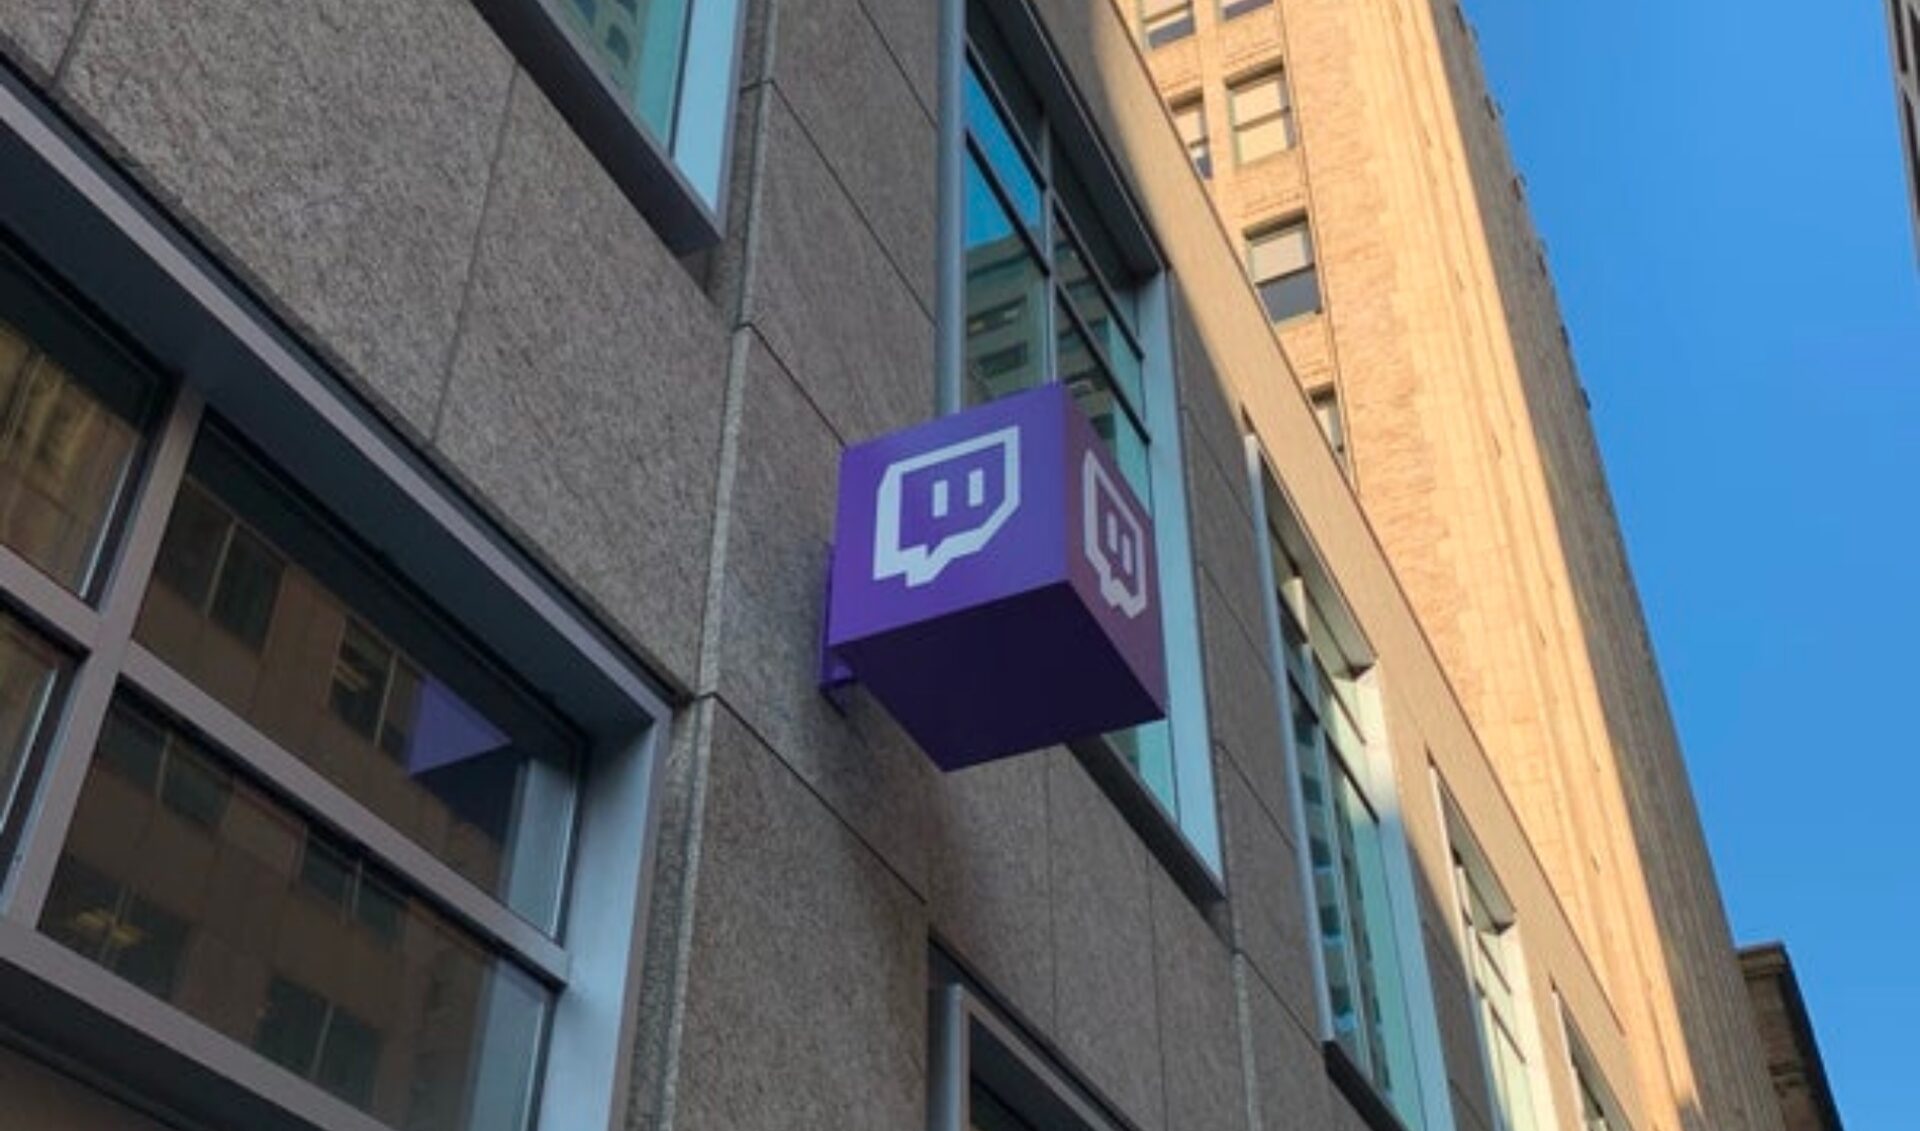 What’s new on Twitch? A rundown of ongoing experiments keeps streamers in the know.